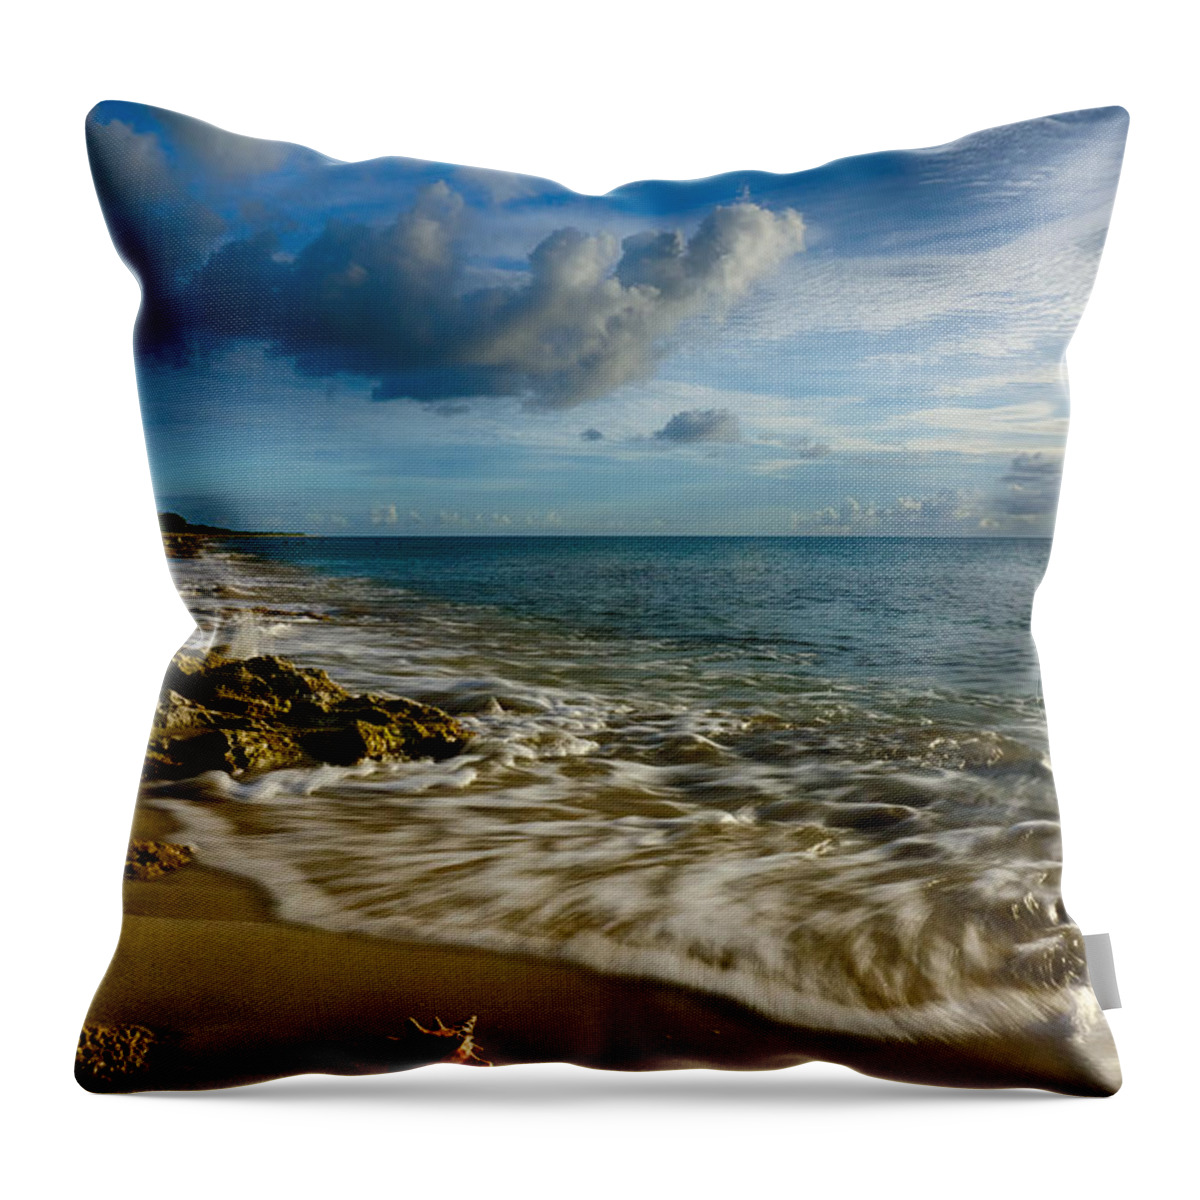 Pristine Throw Pillow featuring the photograph Conch Shell by Amanda Jones